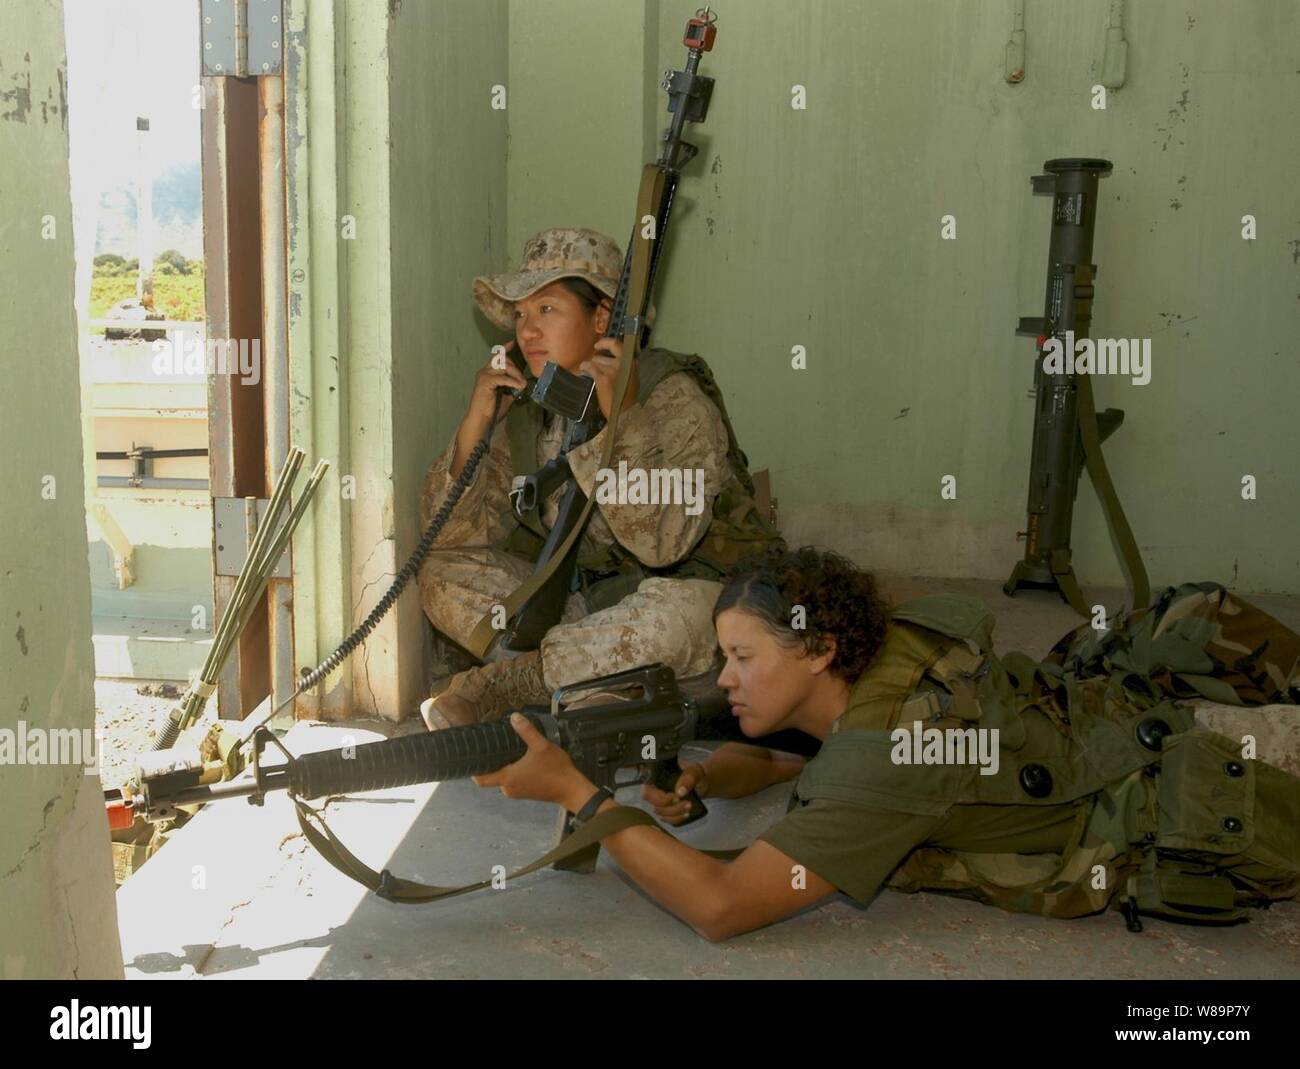 U.S. Marine Lance Cpls. Sueann Cheung (left) and Mildred Valentin monitor and communicate enemy troop movement during an Amphibious Assault training scenario of exercise Rim of the Pacific '04 on the island of Oahu, Hawaii, on July 20, 2004.  Exercise Rim of the Pacific '04 is an international maritime exercise designed to enhance the tactical proficiency of participating Pacific Rim nations including participants from Australia, Canada, Chile, Japan, South Korea, the United Kingdom, and the U.S. Stock Photo